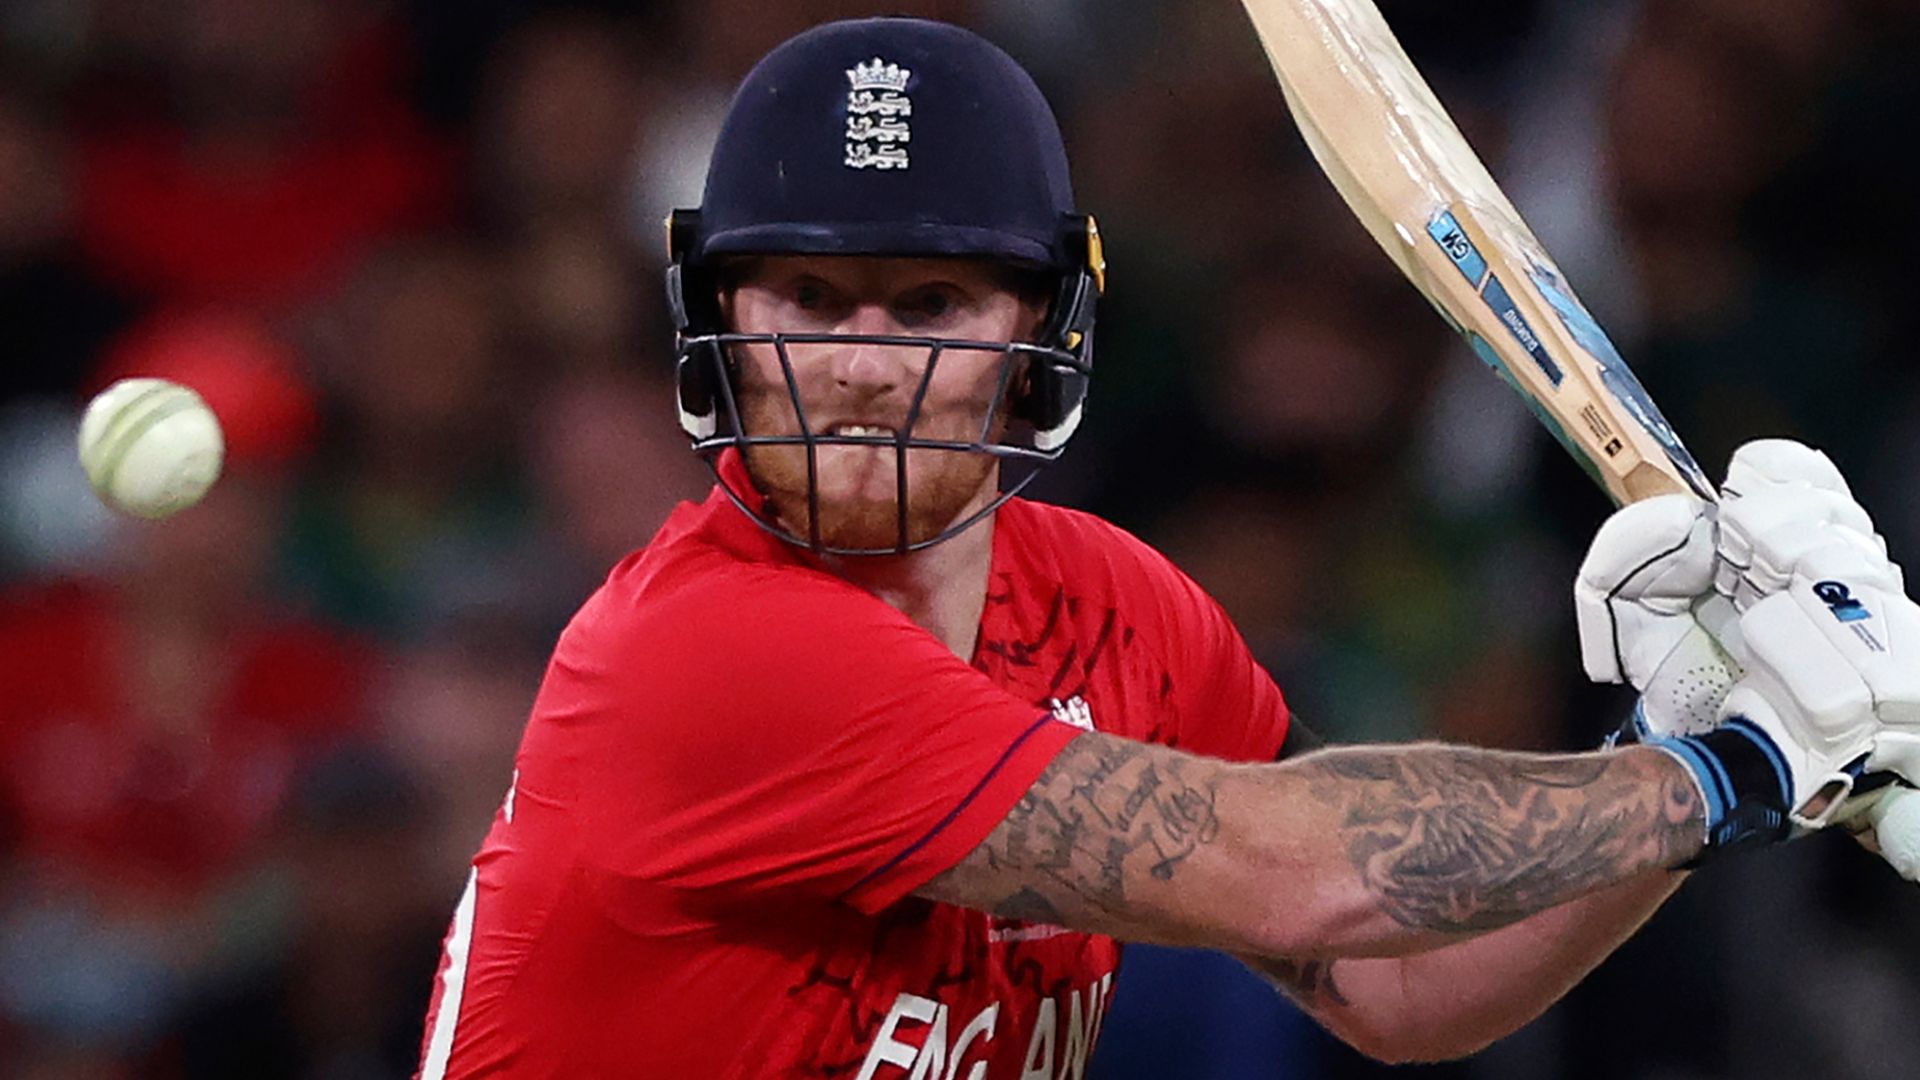 Stokes on the crease; England 4 down chasing 138 to win World Cup LIVE!SkySports | Information